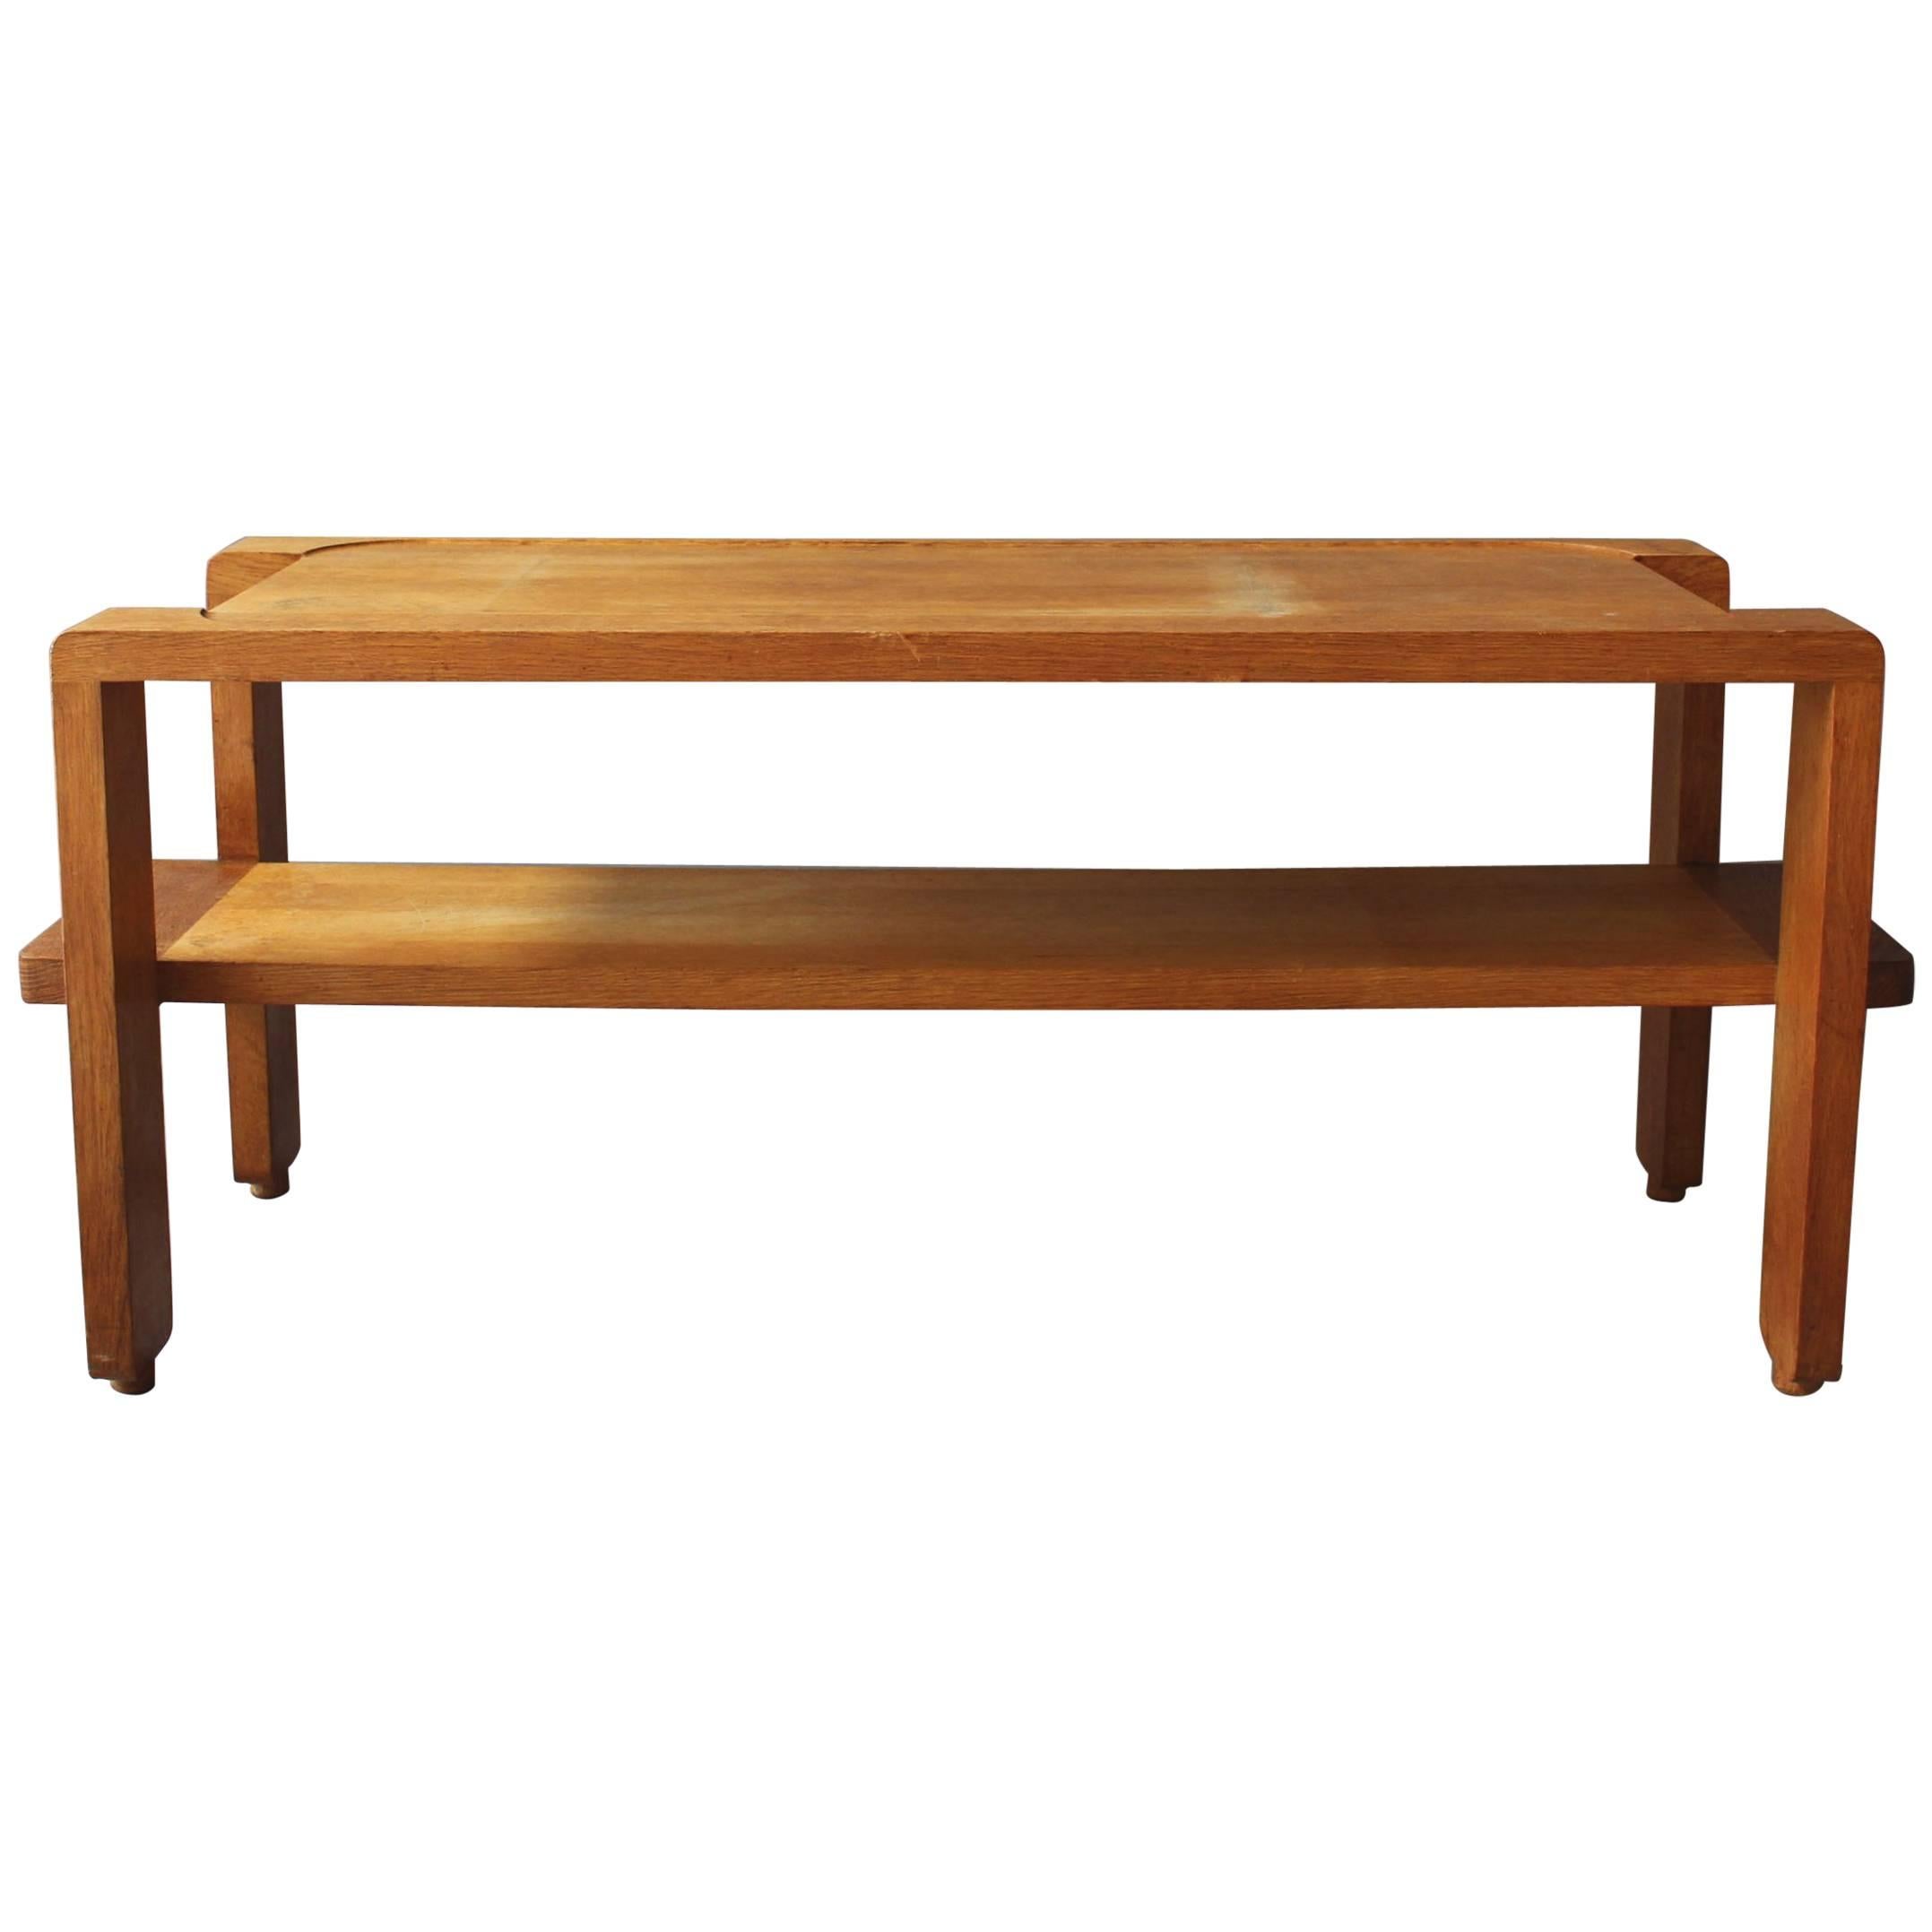 A French 1950s Oak Coffee Table by Guillerme & Chambron